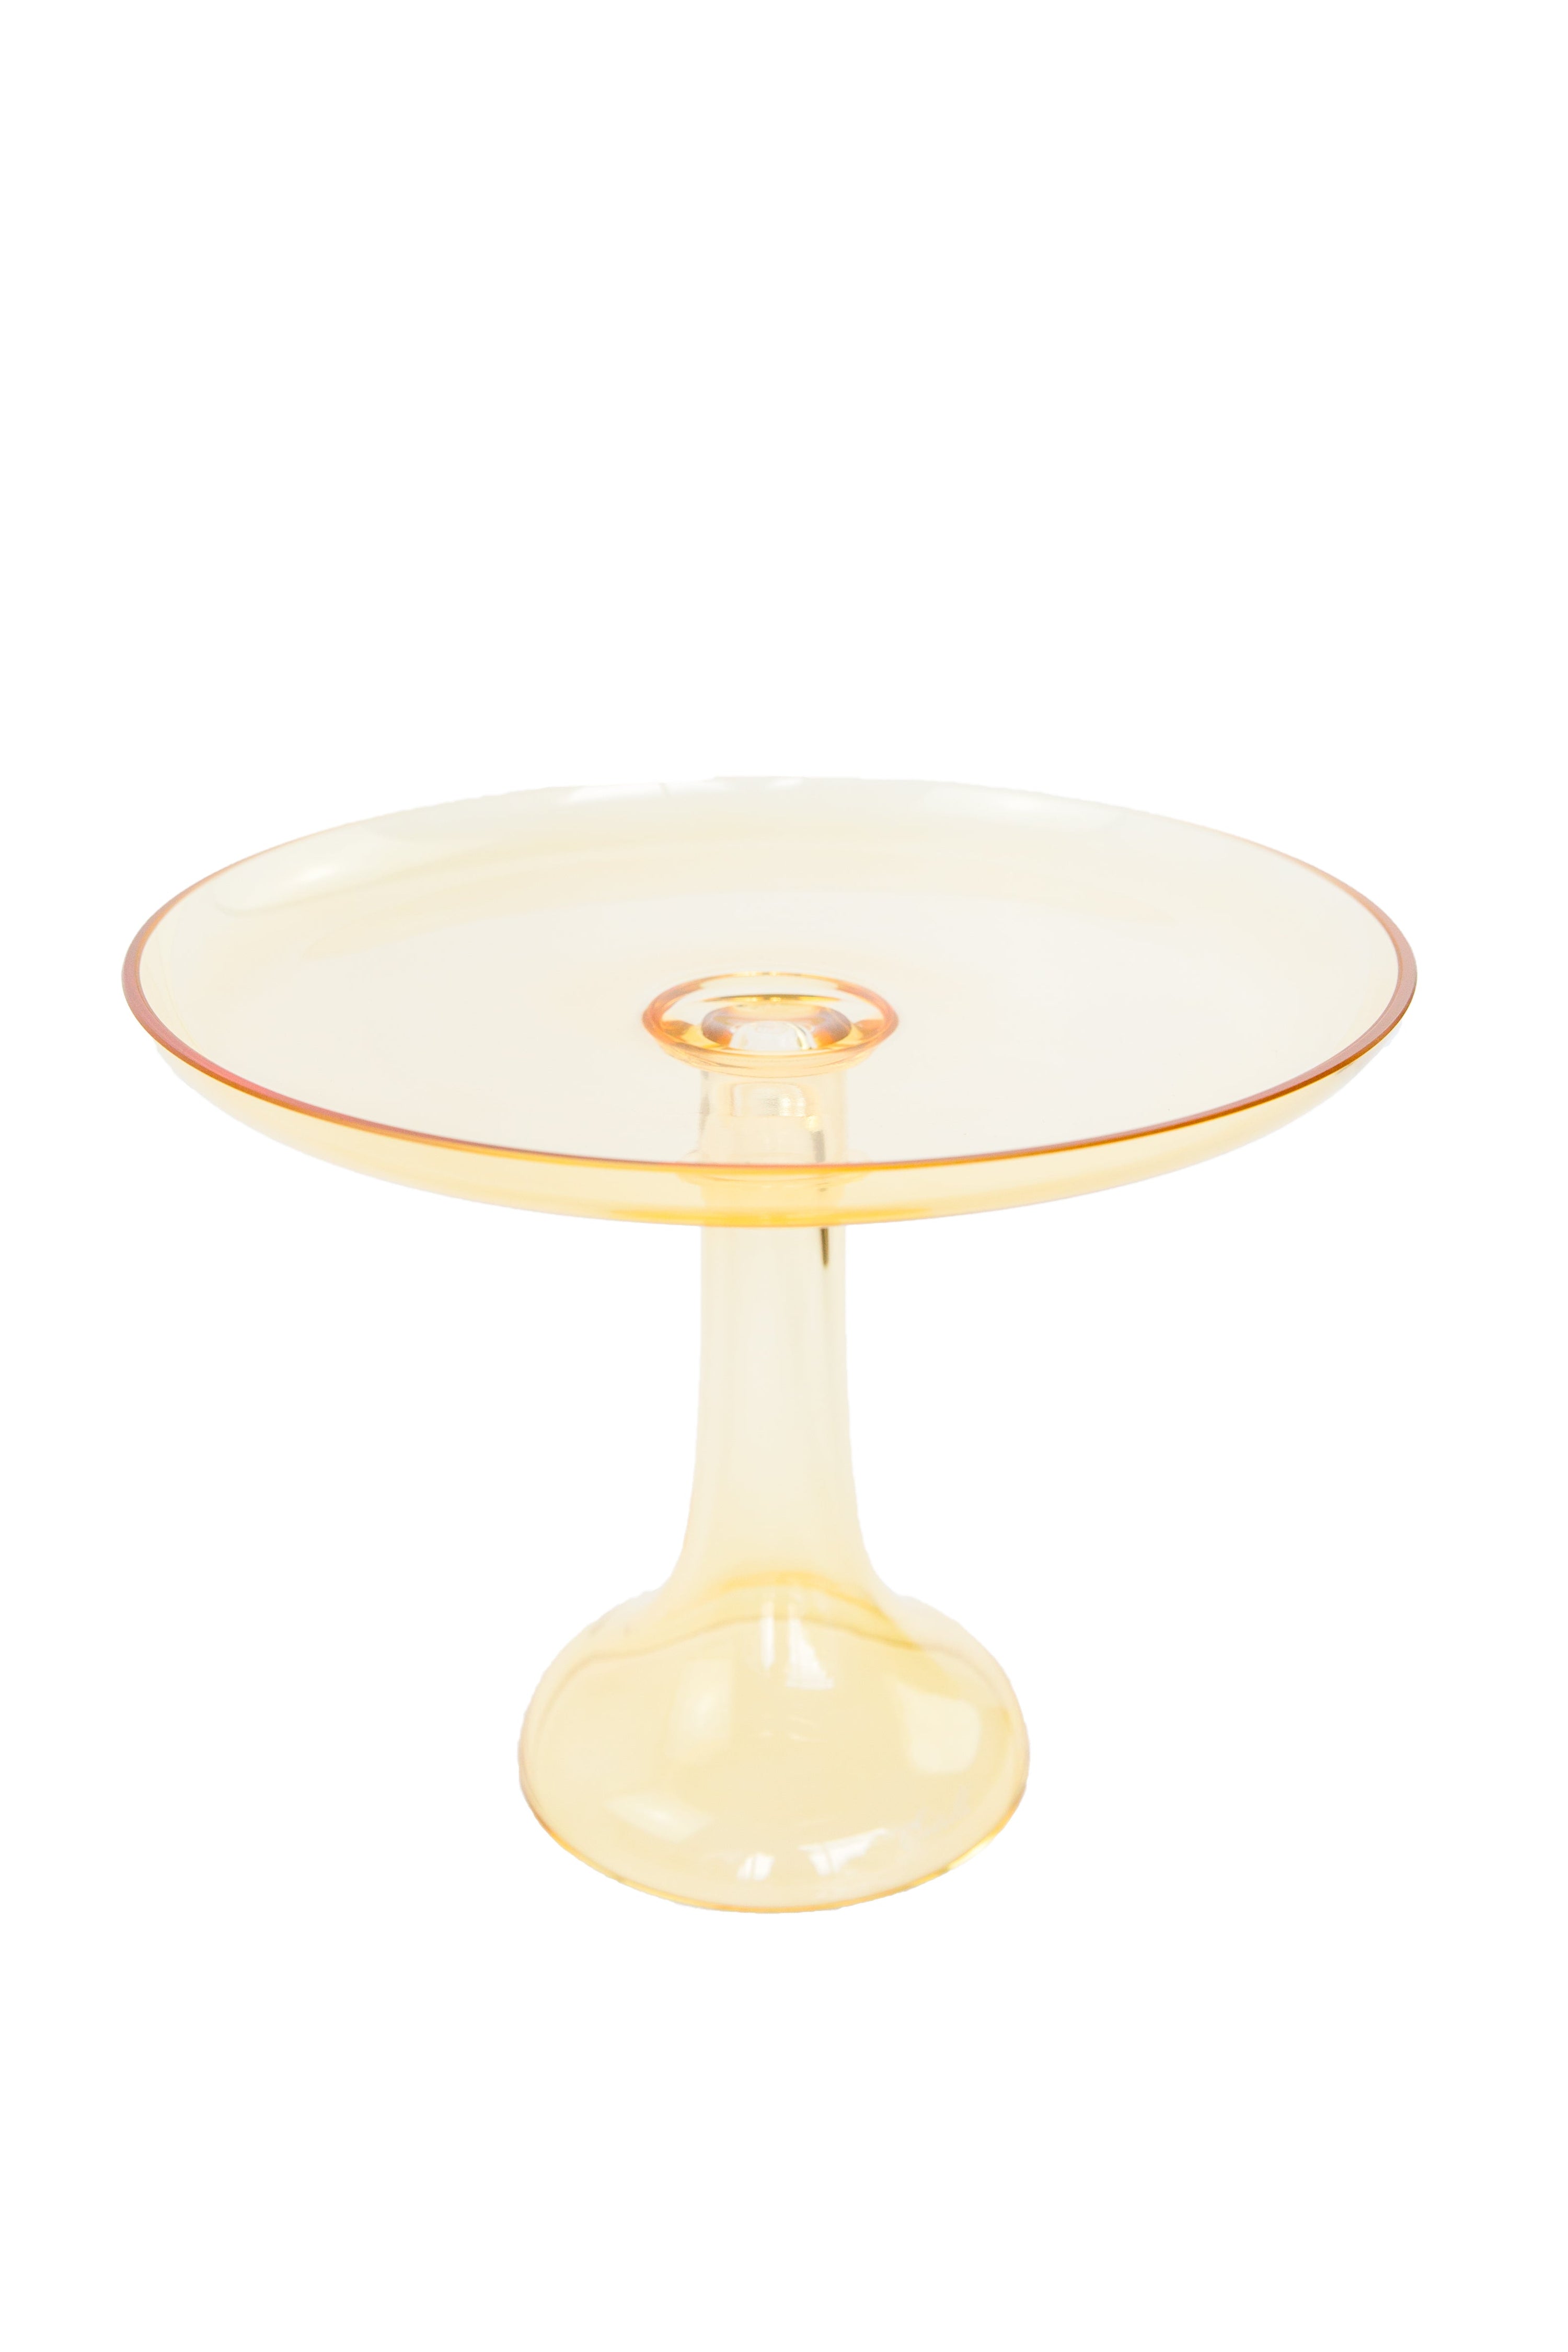 Colored Glass Cake Stand